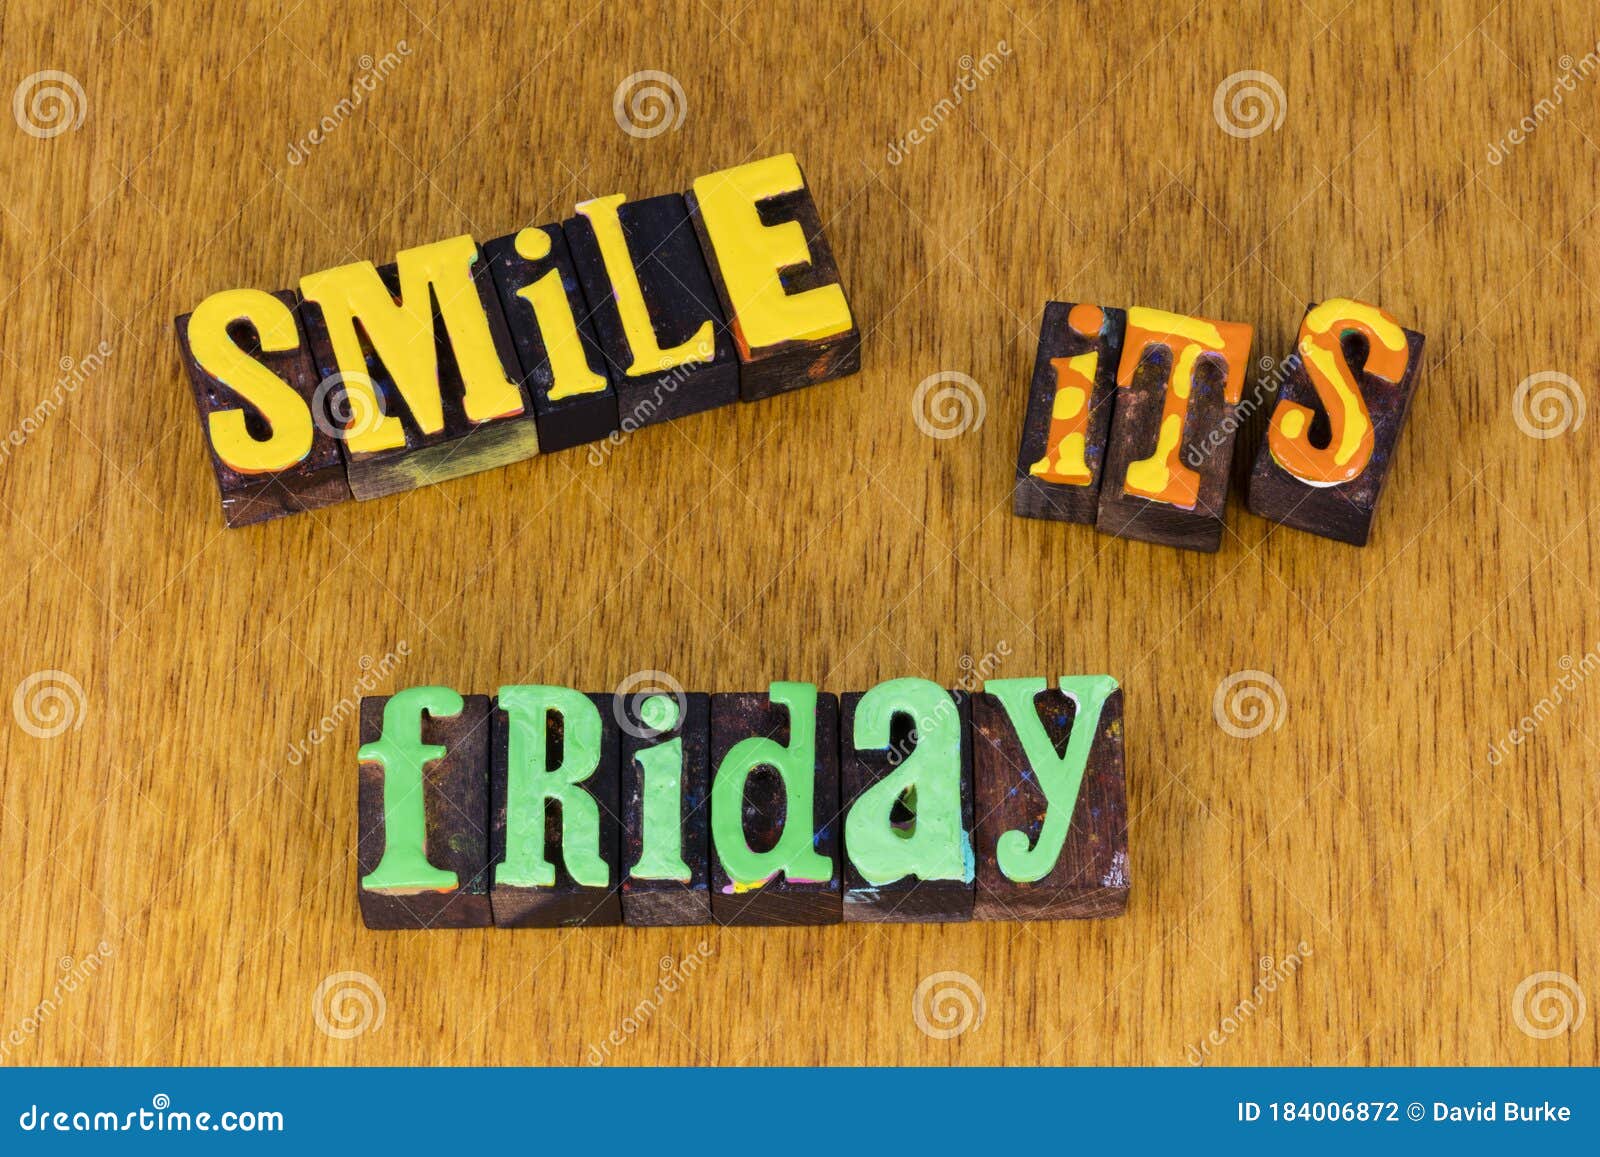 Smile Friday Weekend Happy Pleasure Time Fun Work Happiness Stock Photo ...